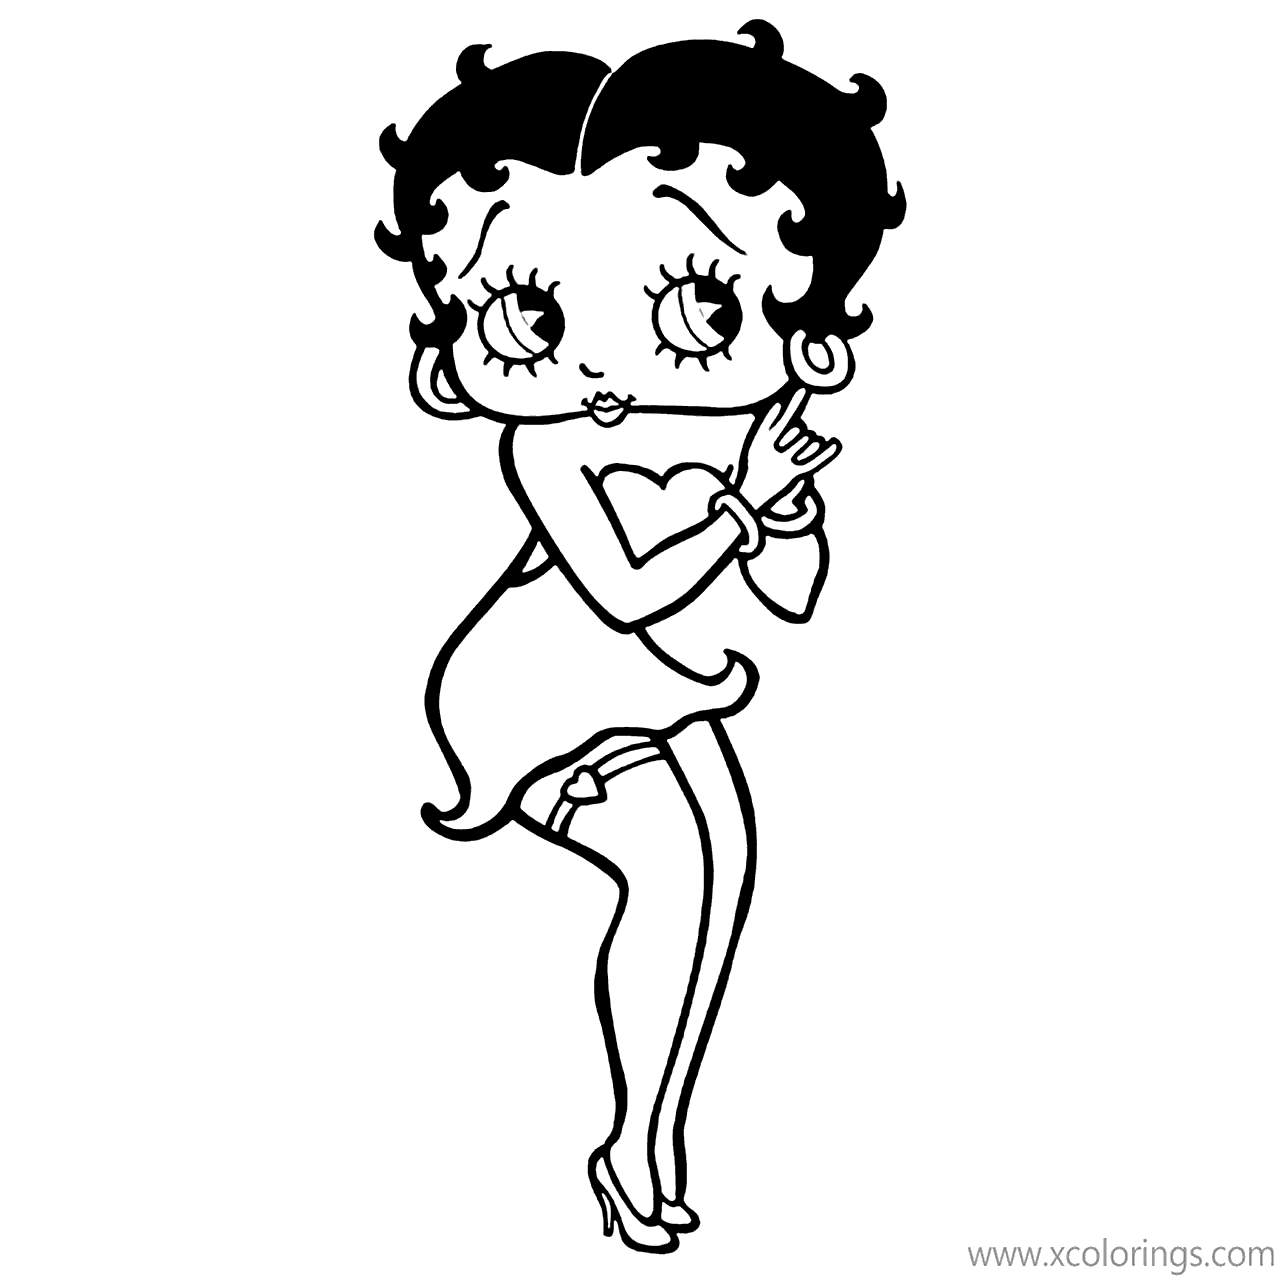 gorgeous-betty-boop-coloring-pages-xcolorings